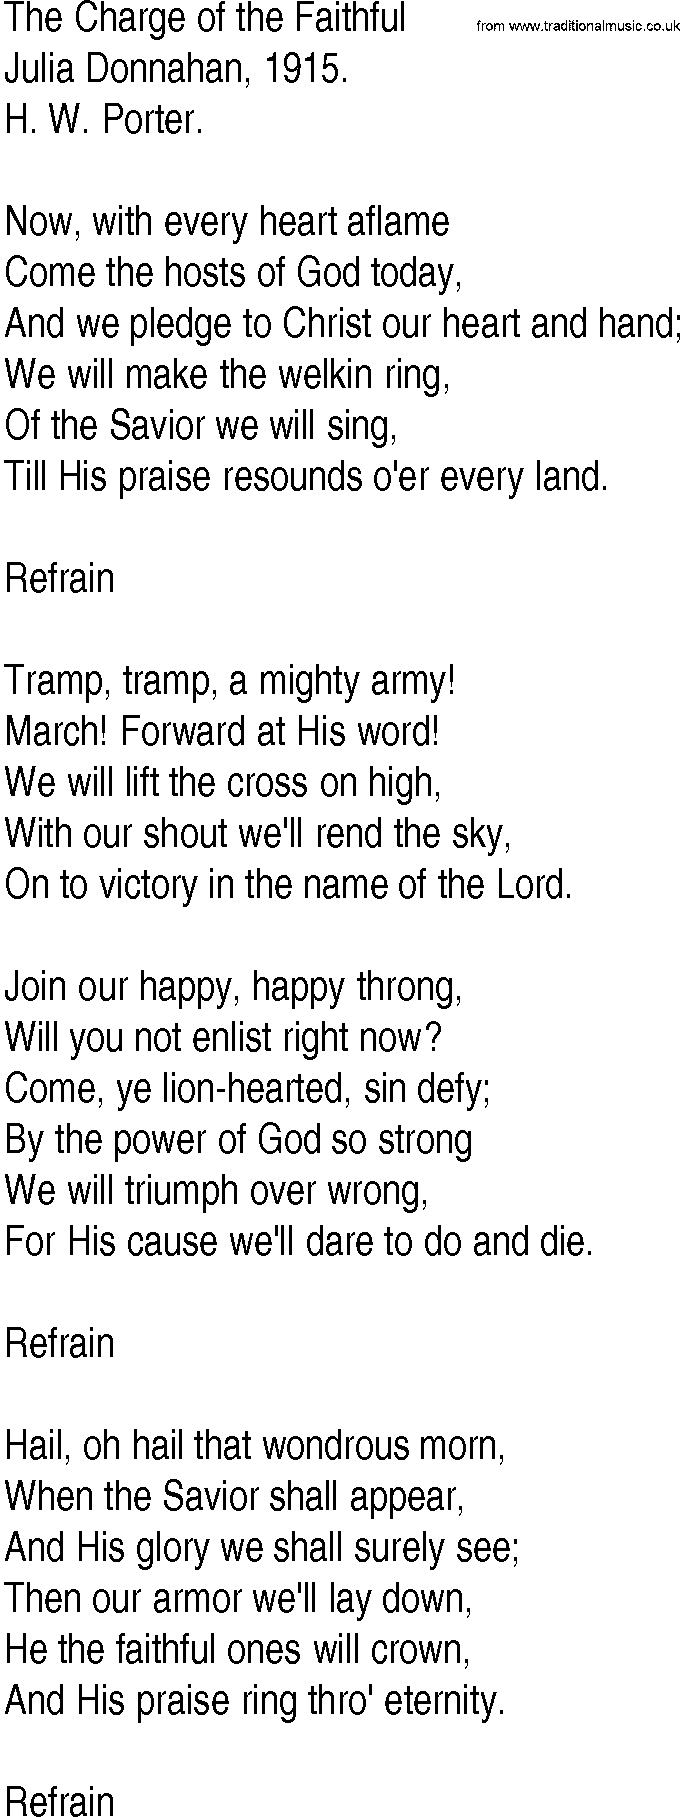 Hymn and Gospel Song: The Charge of the Faithful by Julia Donnahan lyrics